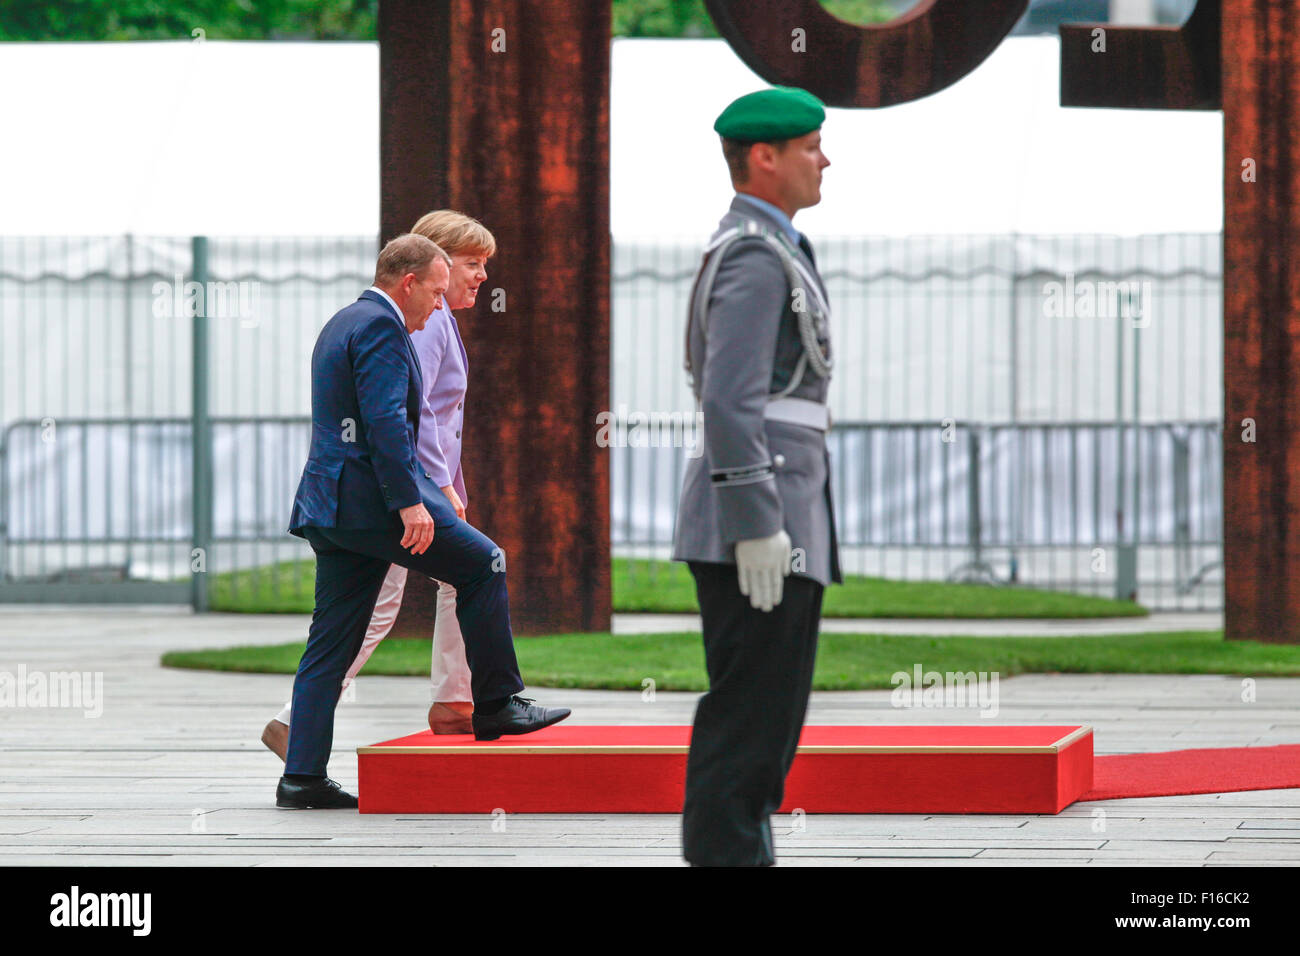 Berlin, Germany. 28th August, 2015. German Chancellor Angela Merkel welcomes Lars Løkke Rasmussen, Prime Minister of Denmark, with militar honors  at the German Chancellery in Berlin Germany on 28 August 2015. / Picture: German Chancellor Angela Merkel and Lars Løkke Rasmussen, Prime Minister of Denmark. Credit:  Reynaldo Chaib Paganelli/Alamy Live News Stock Photo